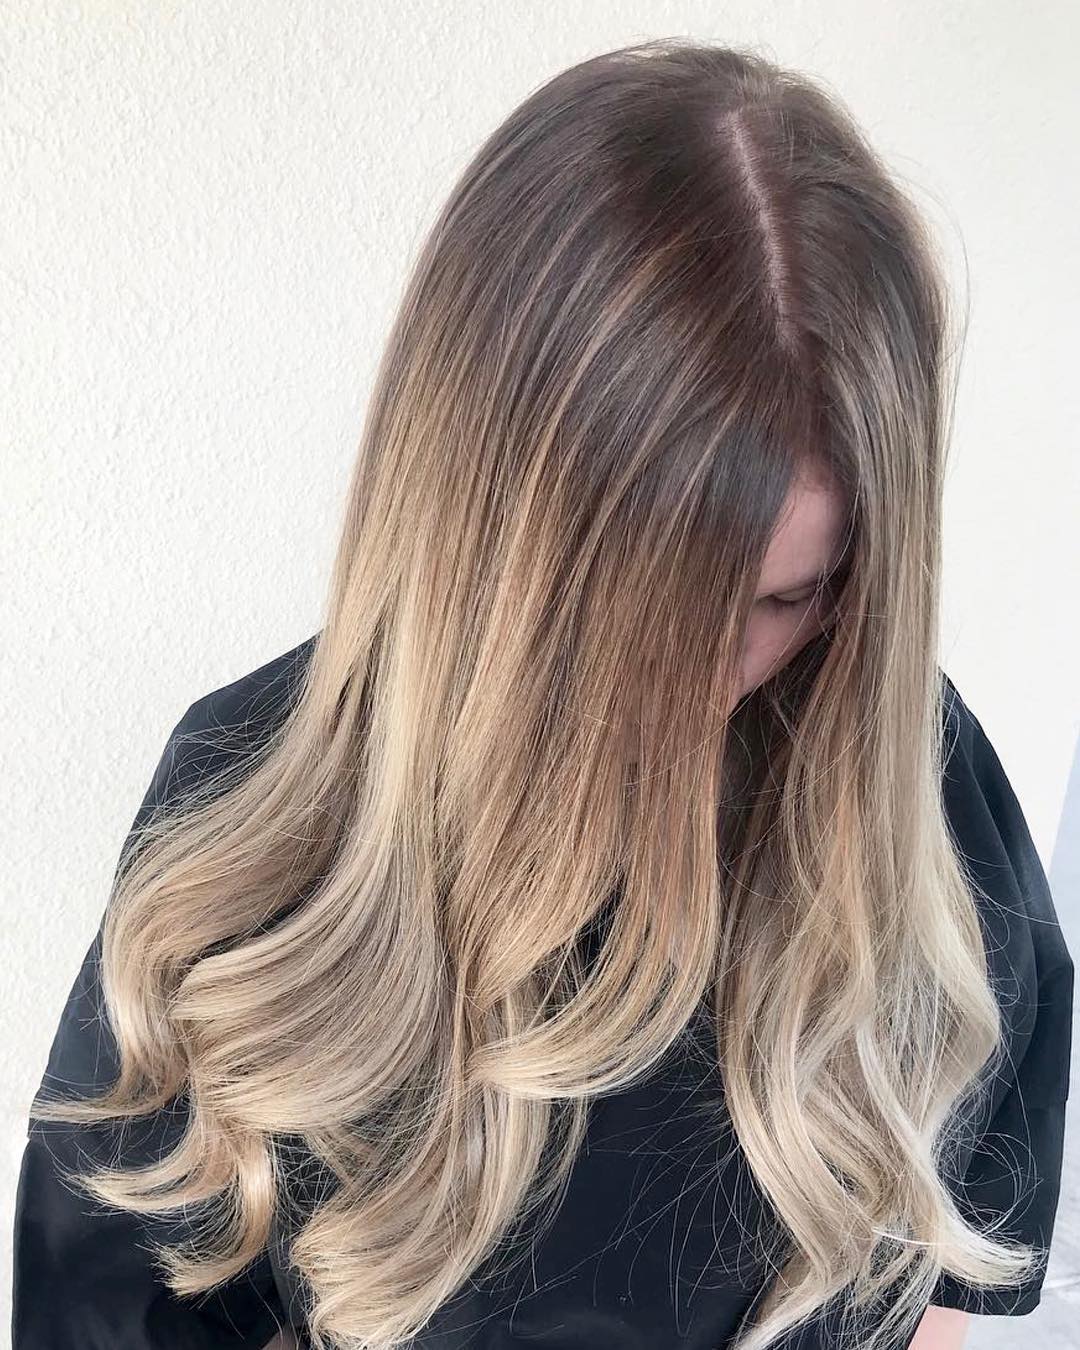 Balayage vs Foils: What's the Difference - Hemisphere Hair